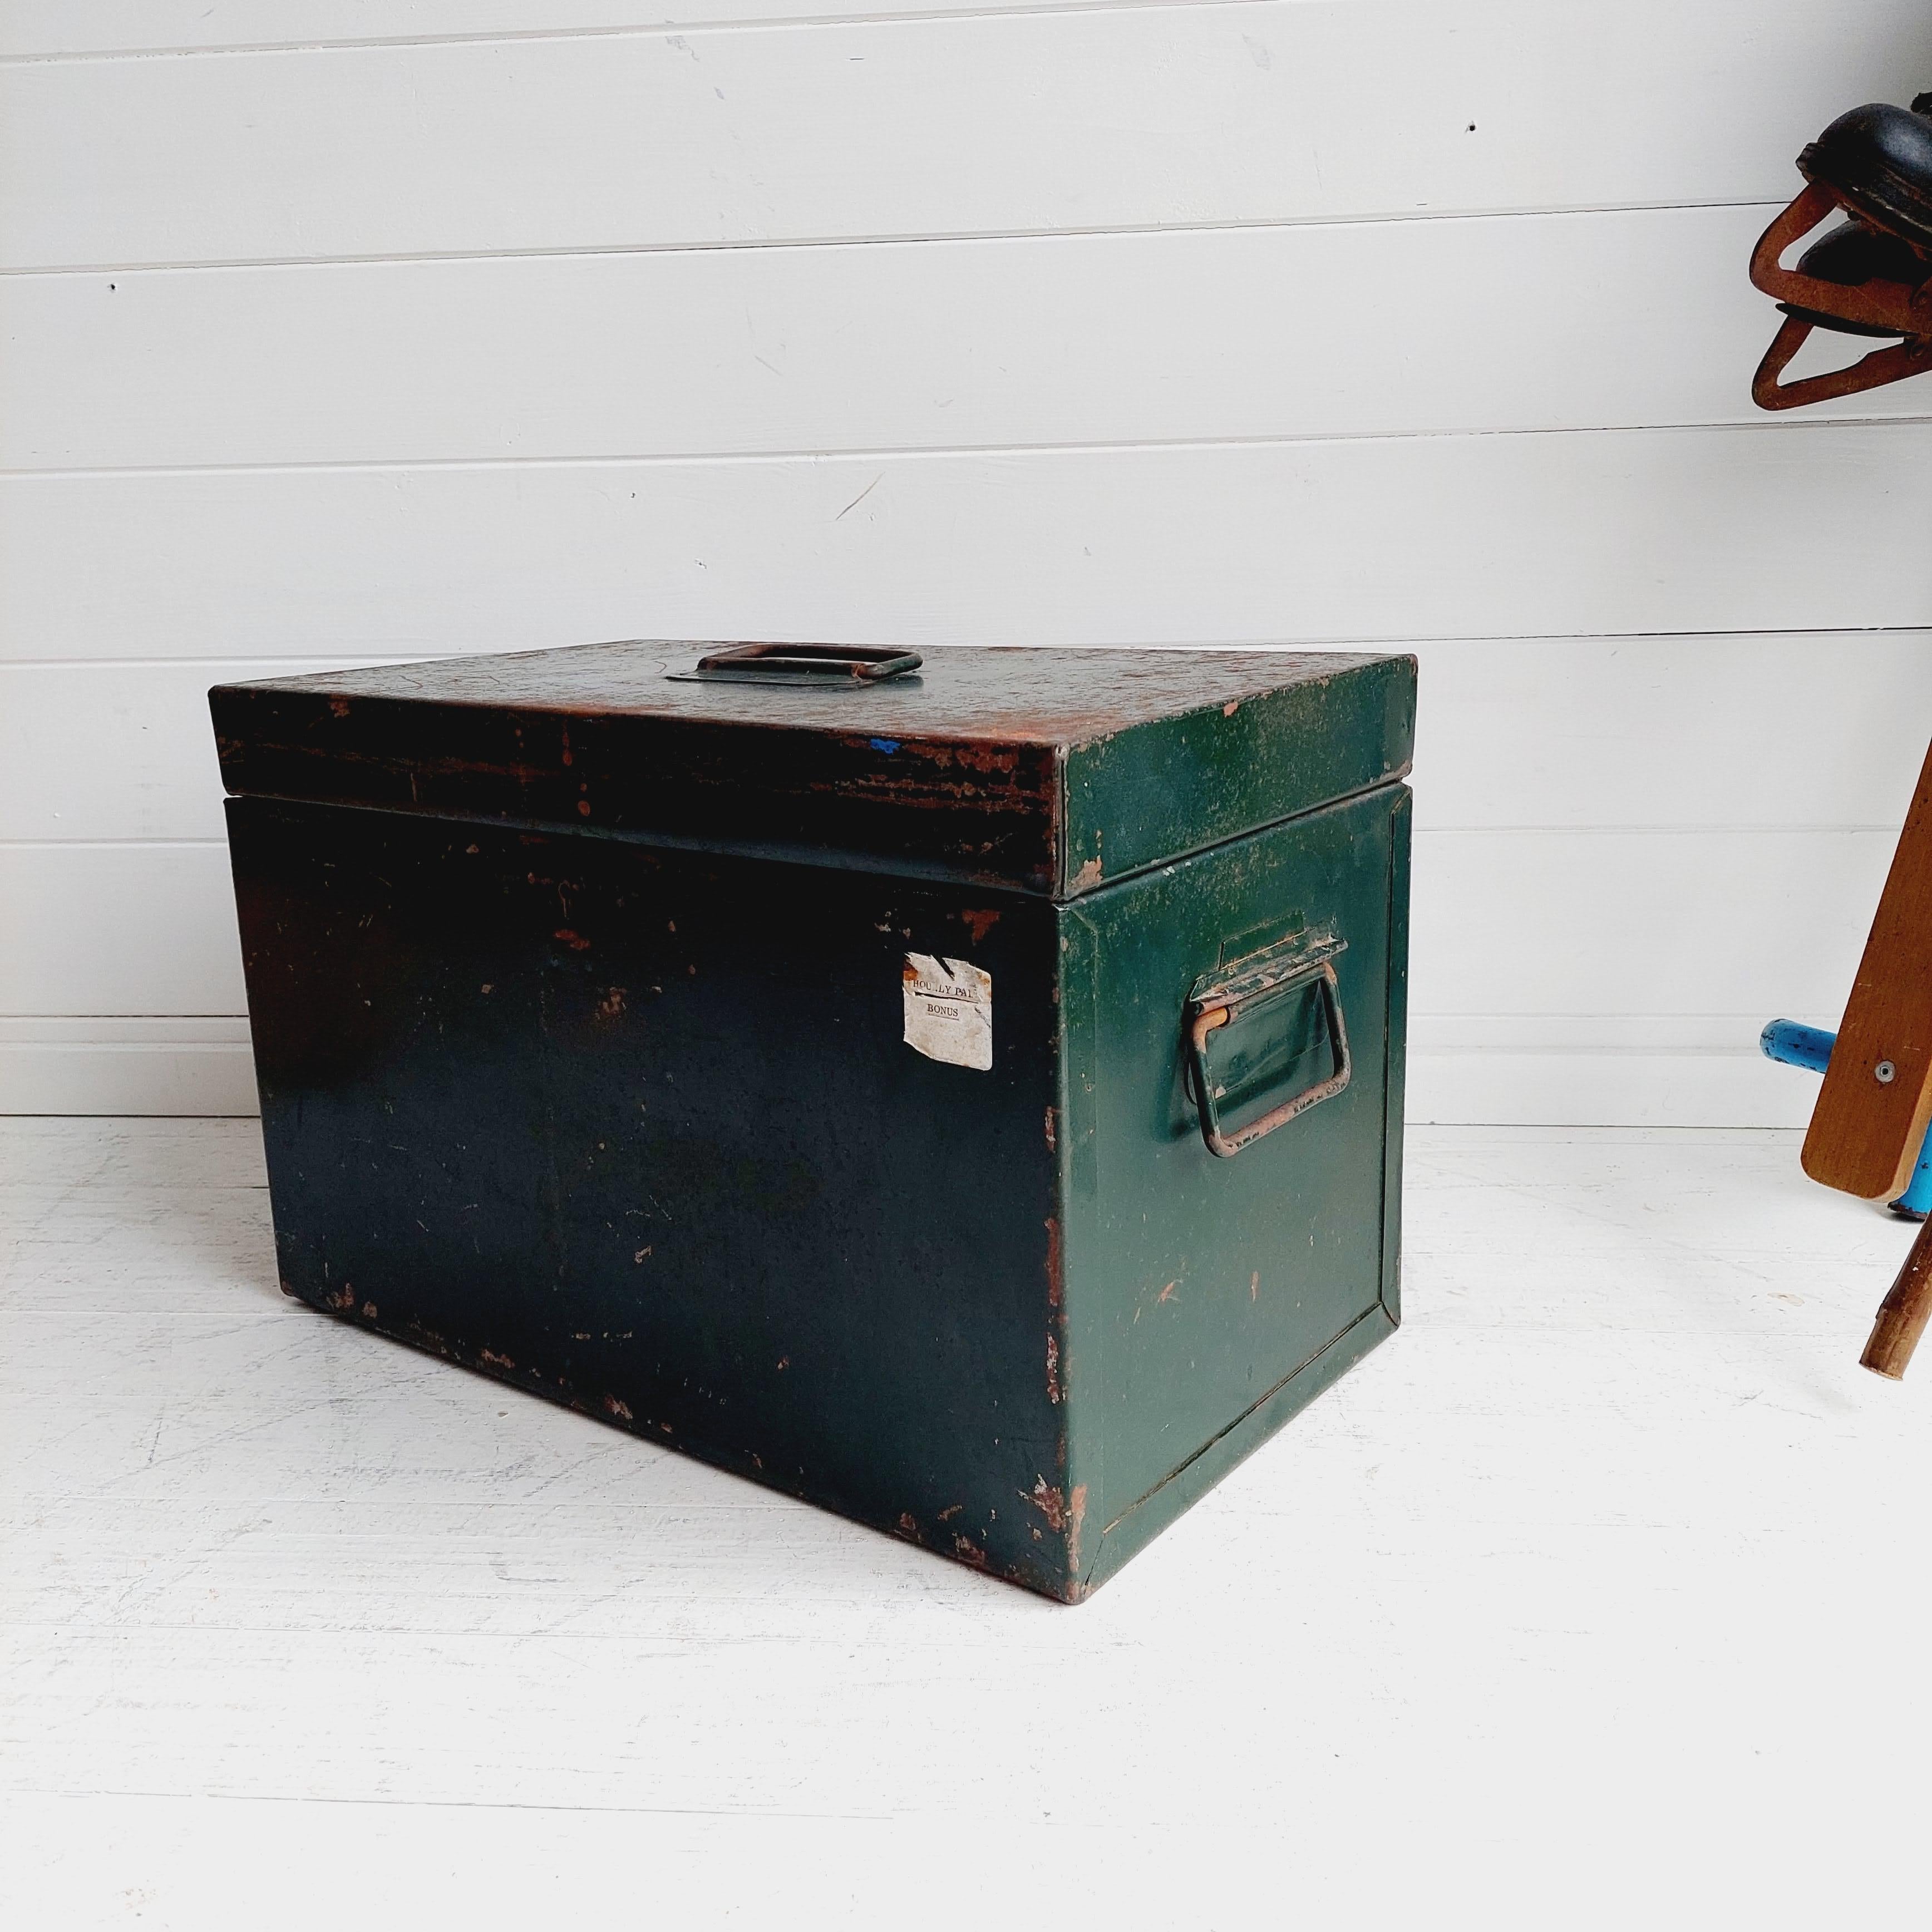 Enameled Industrial Vintage Green Steel Trunk Chest Strong Box with Distressed Paint, 50s